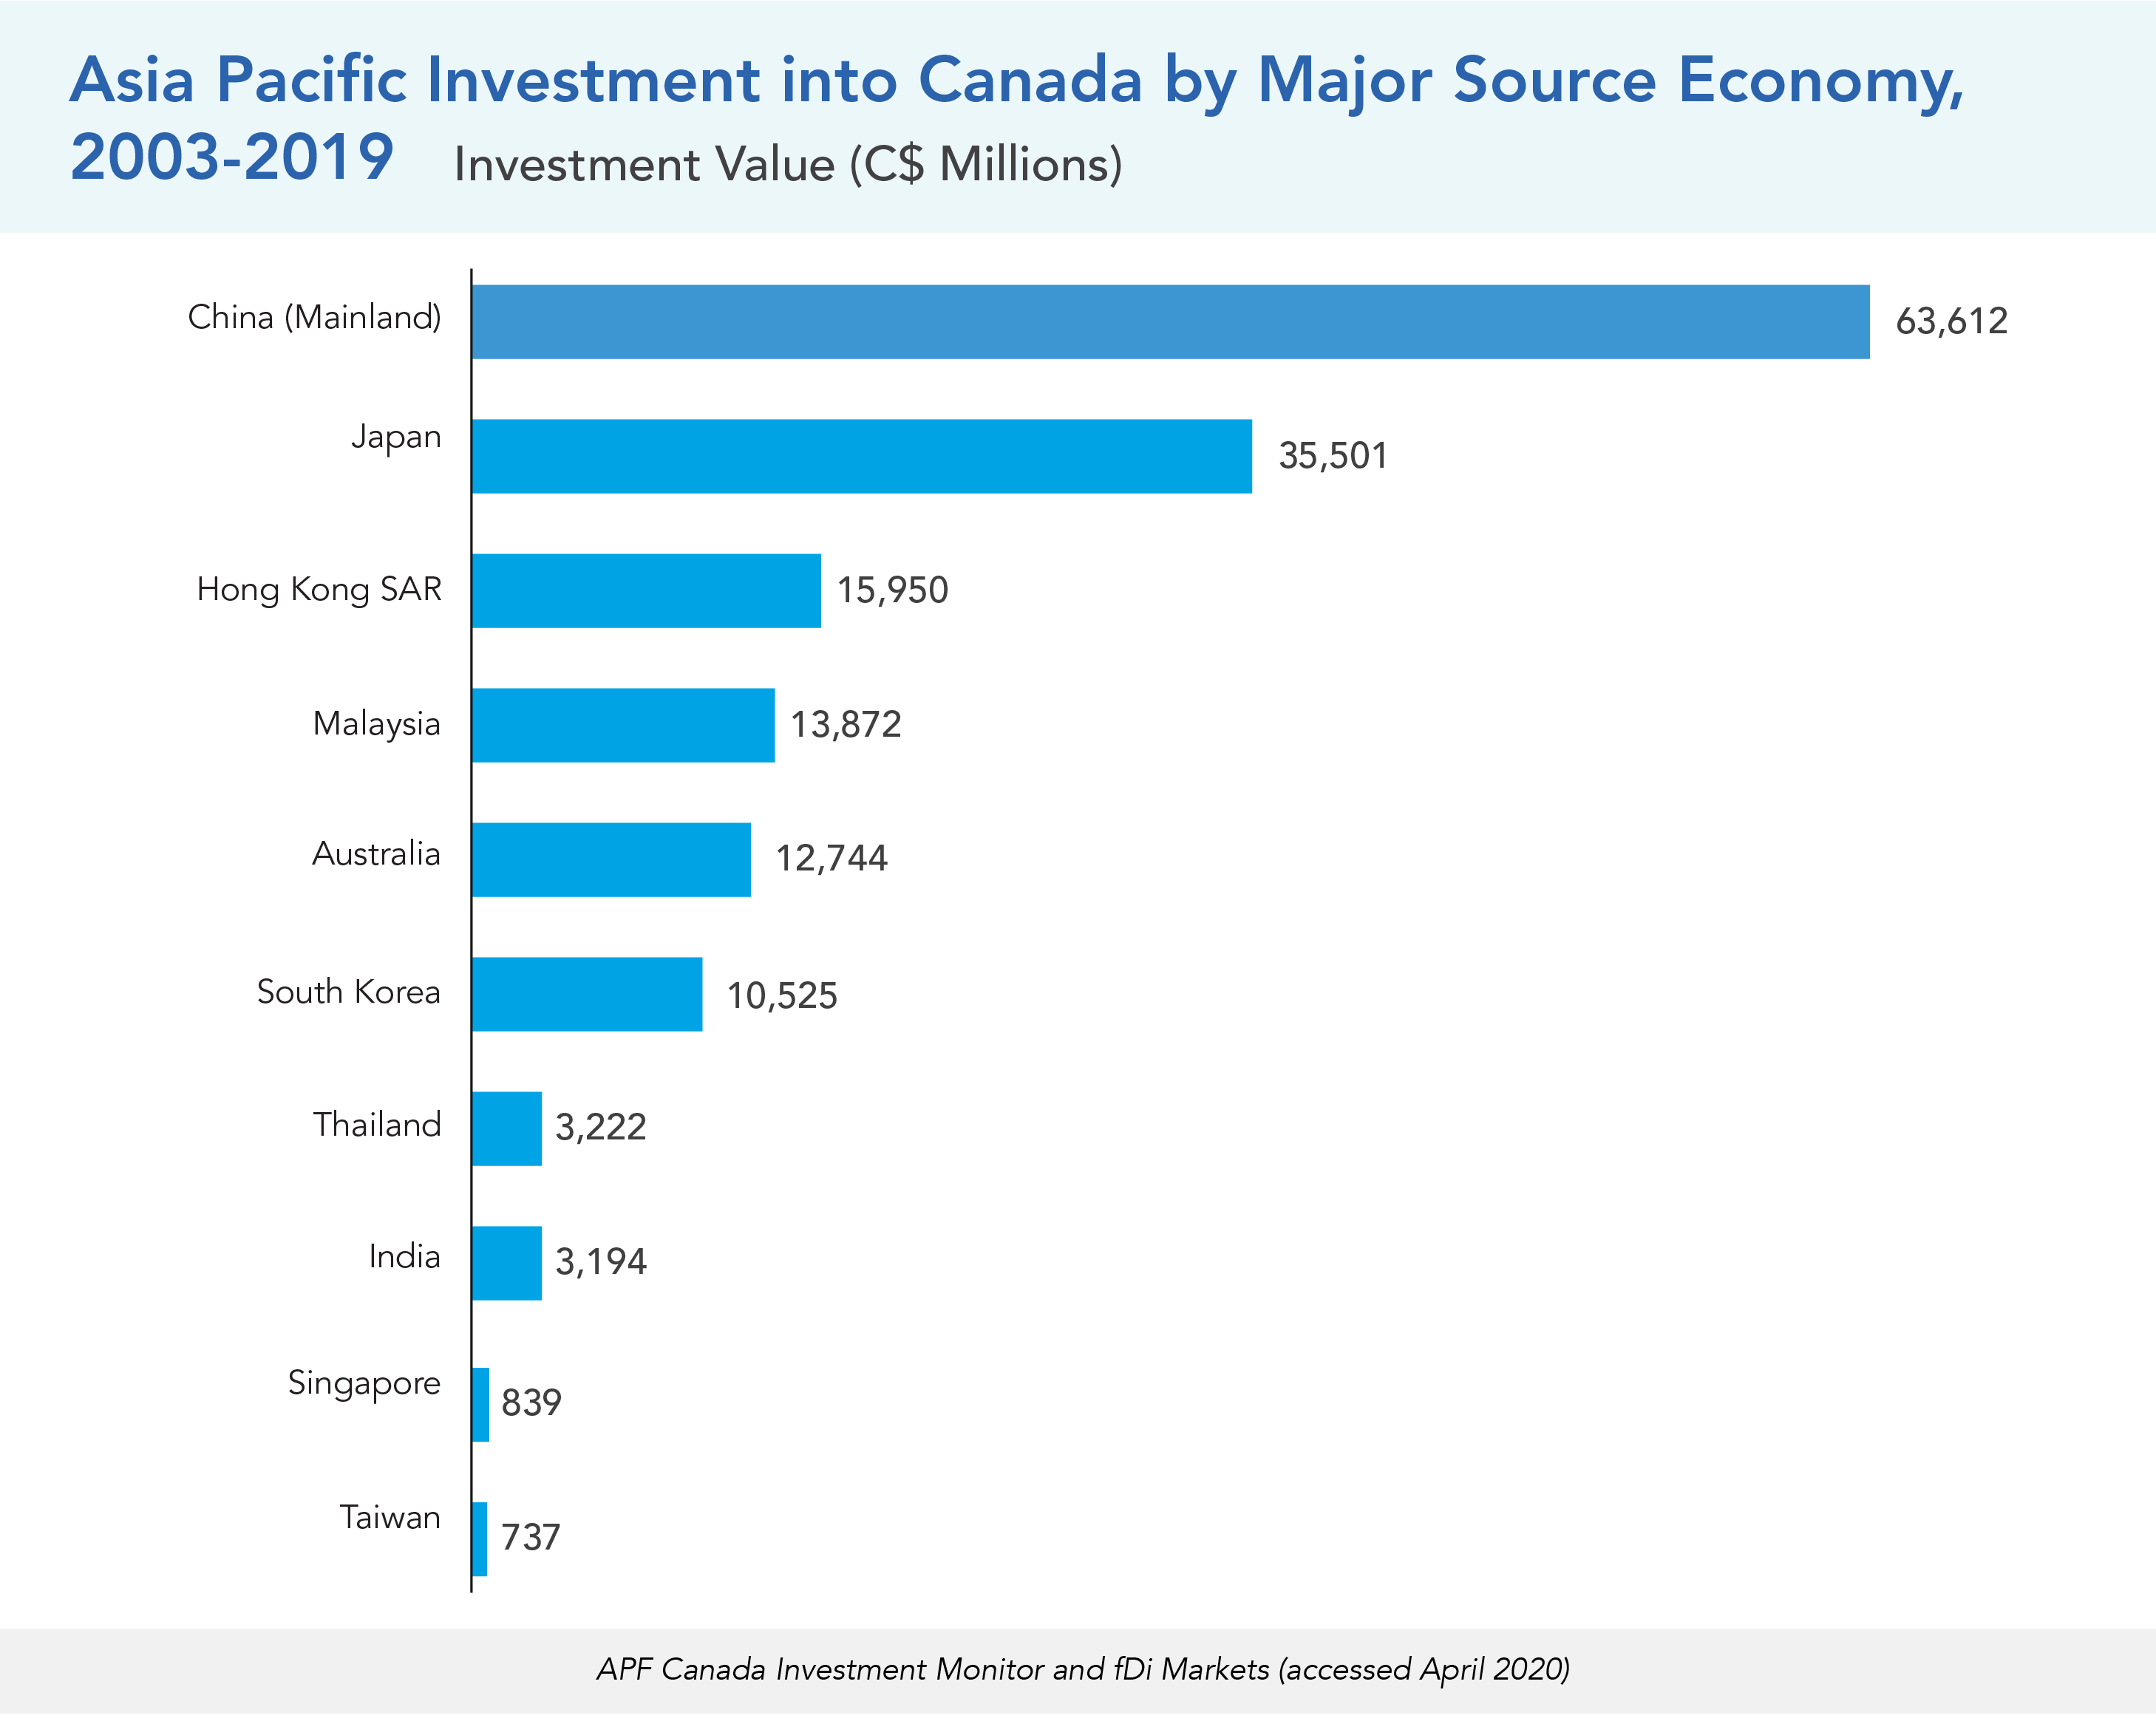 Asia Pacific Investment into Canada by Major Source Economy, 2003-2019